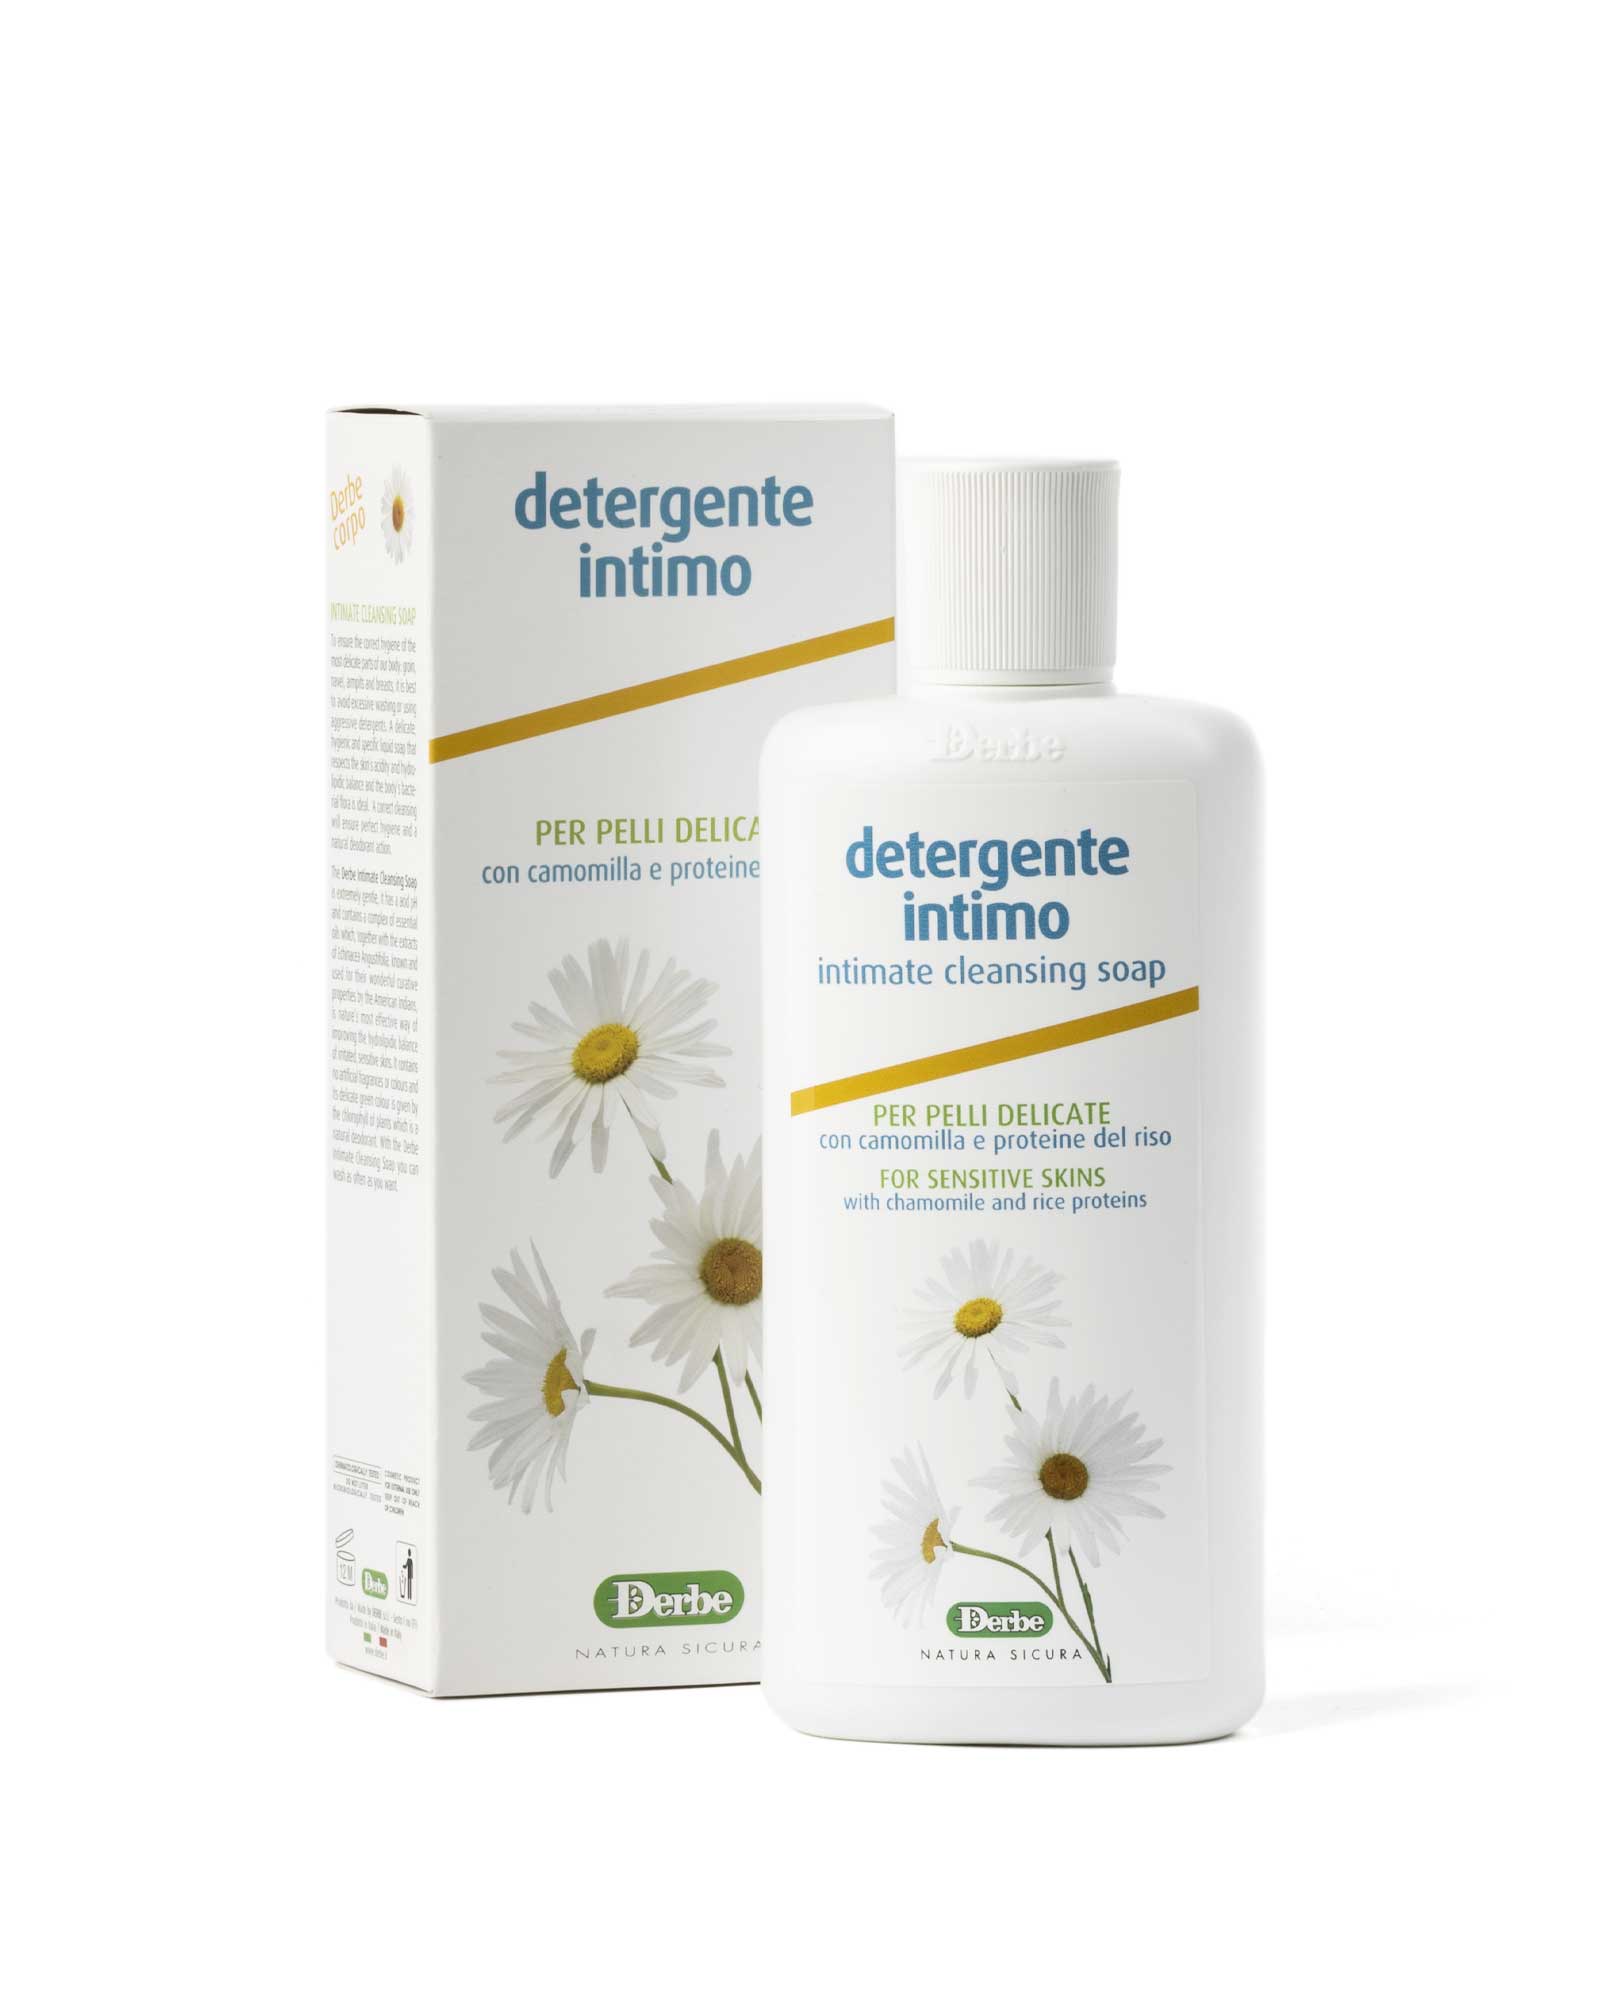 Intimate cleanser for delicate skin – Derbe